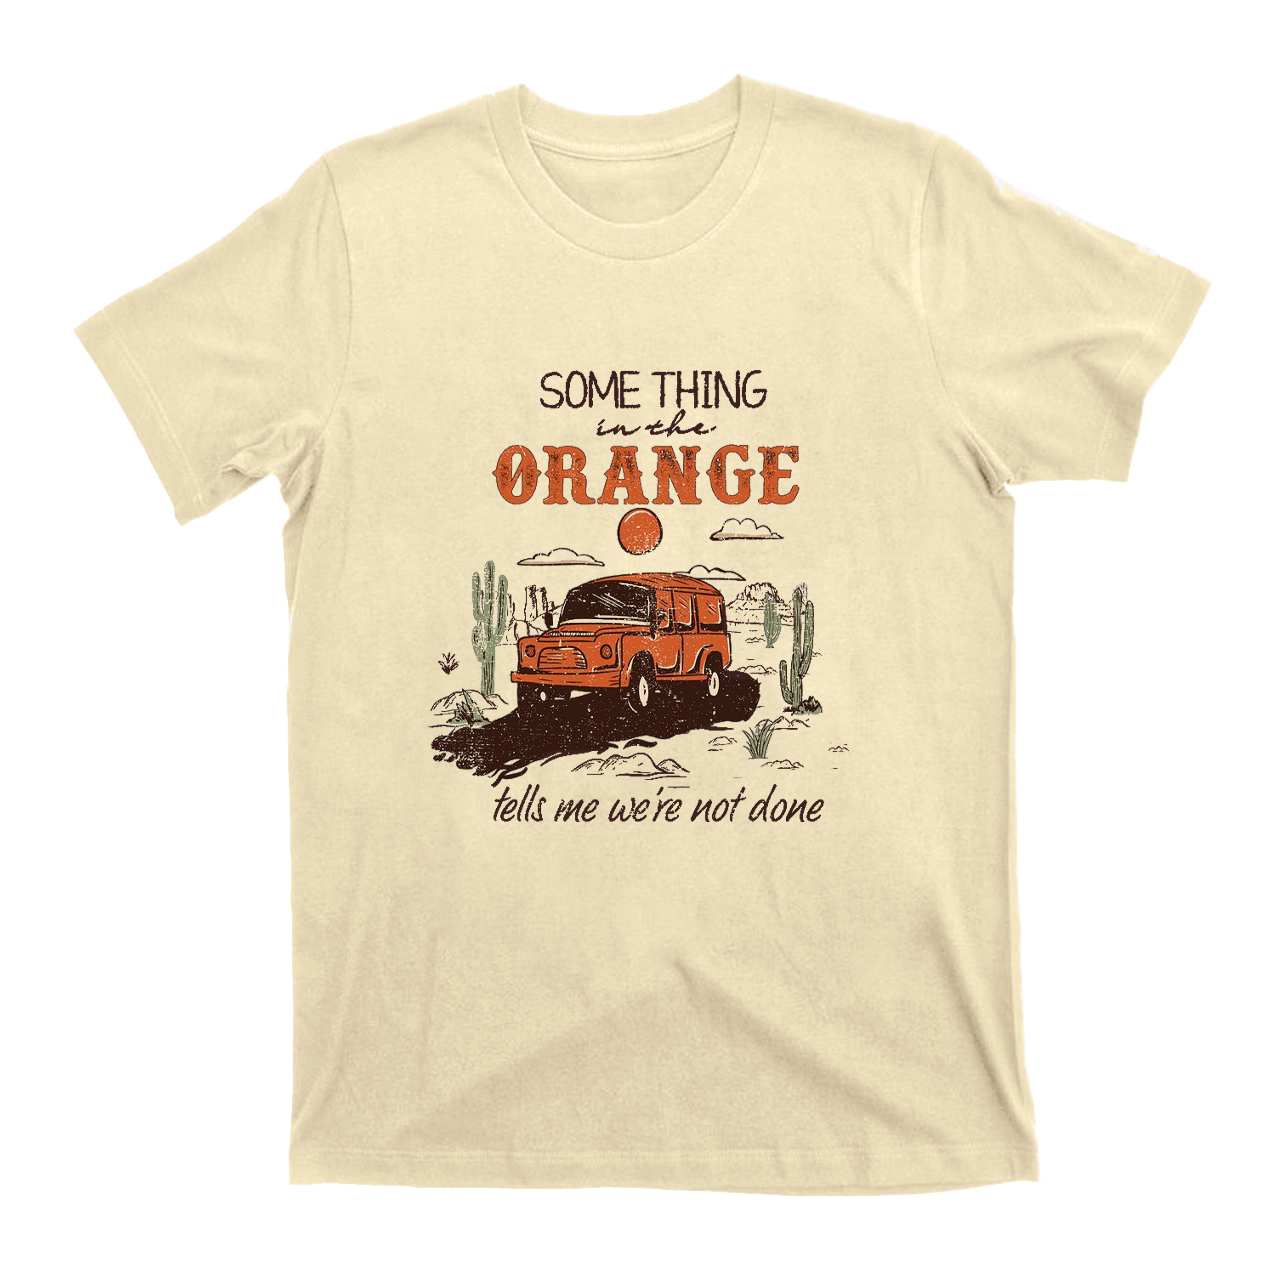 Something In the Orange Tells Me We‘re Not Done T-Shirts